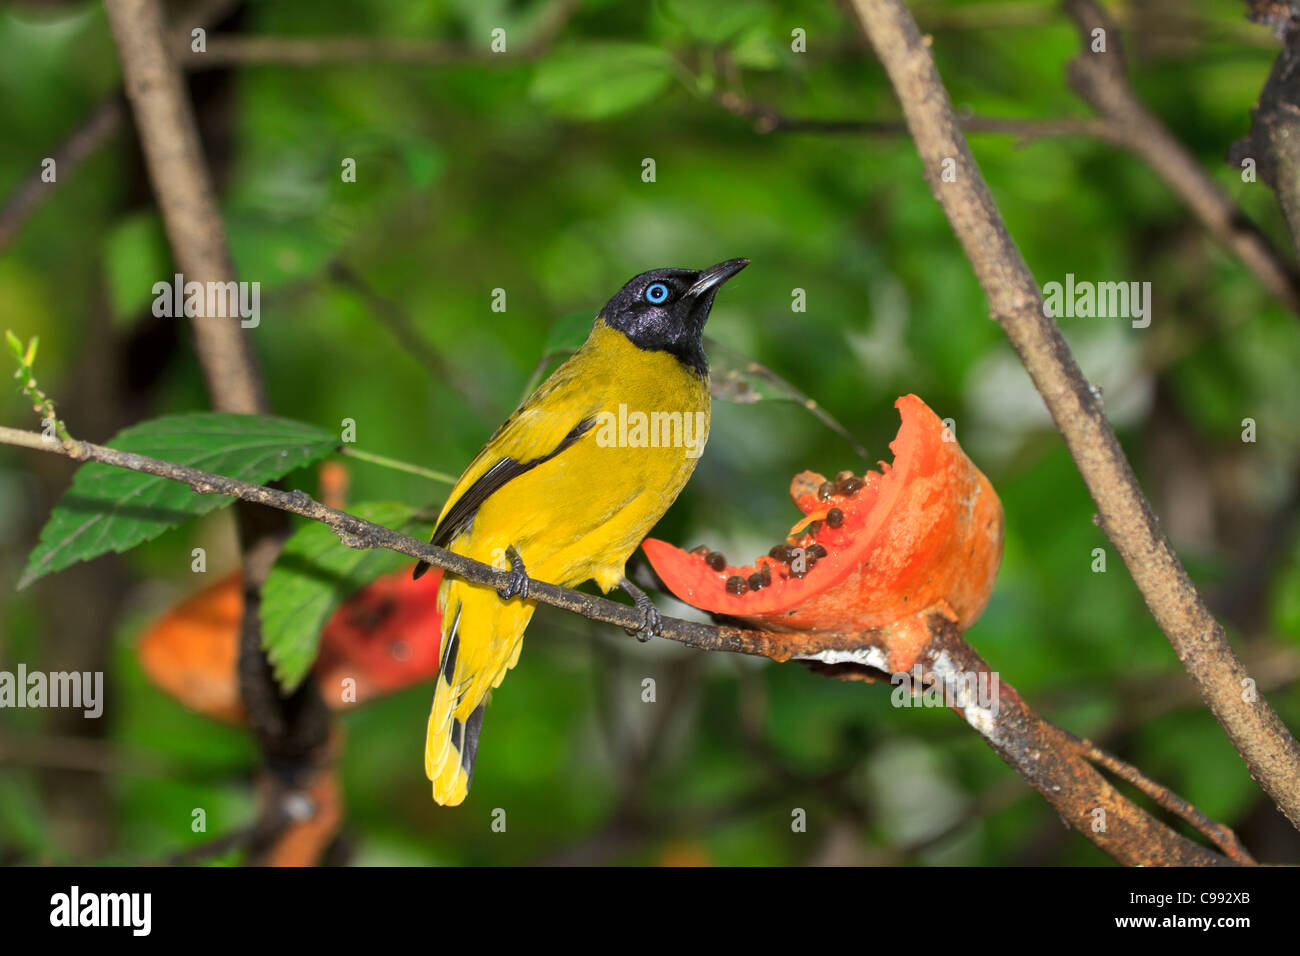 Black-headed Bulbul, Pycnonotus atriceps. A forest bird from Southeast Asia Stock Photo